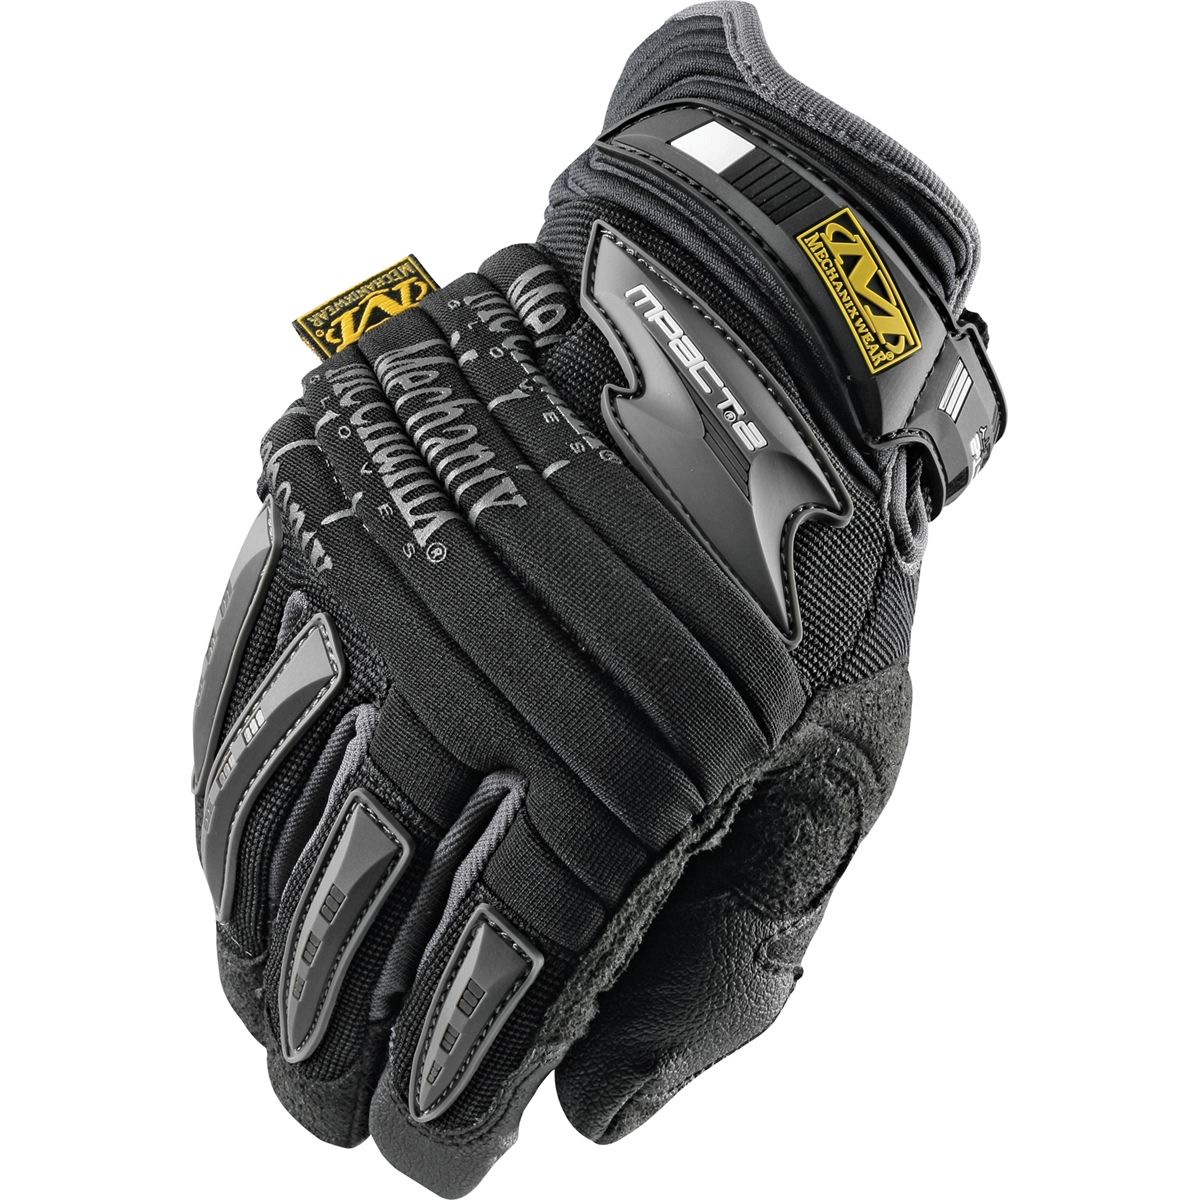 M-Pact II Gloves - Black - XX-Large